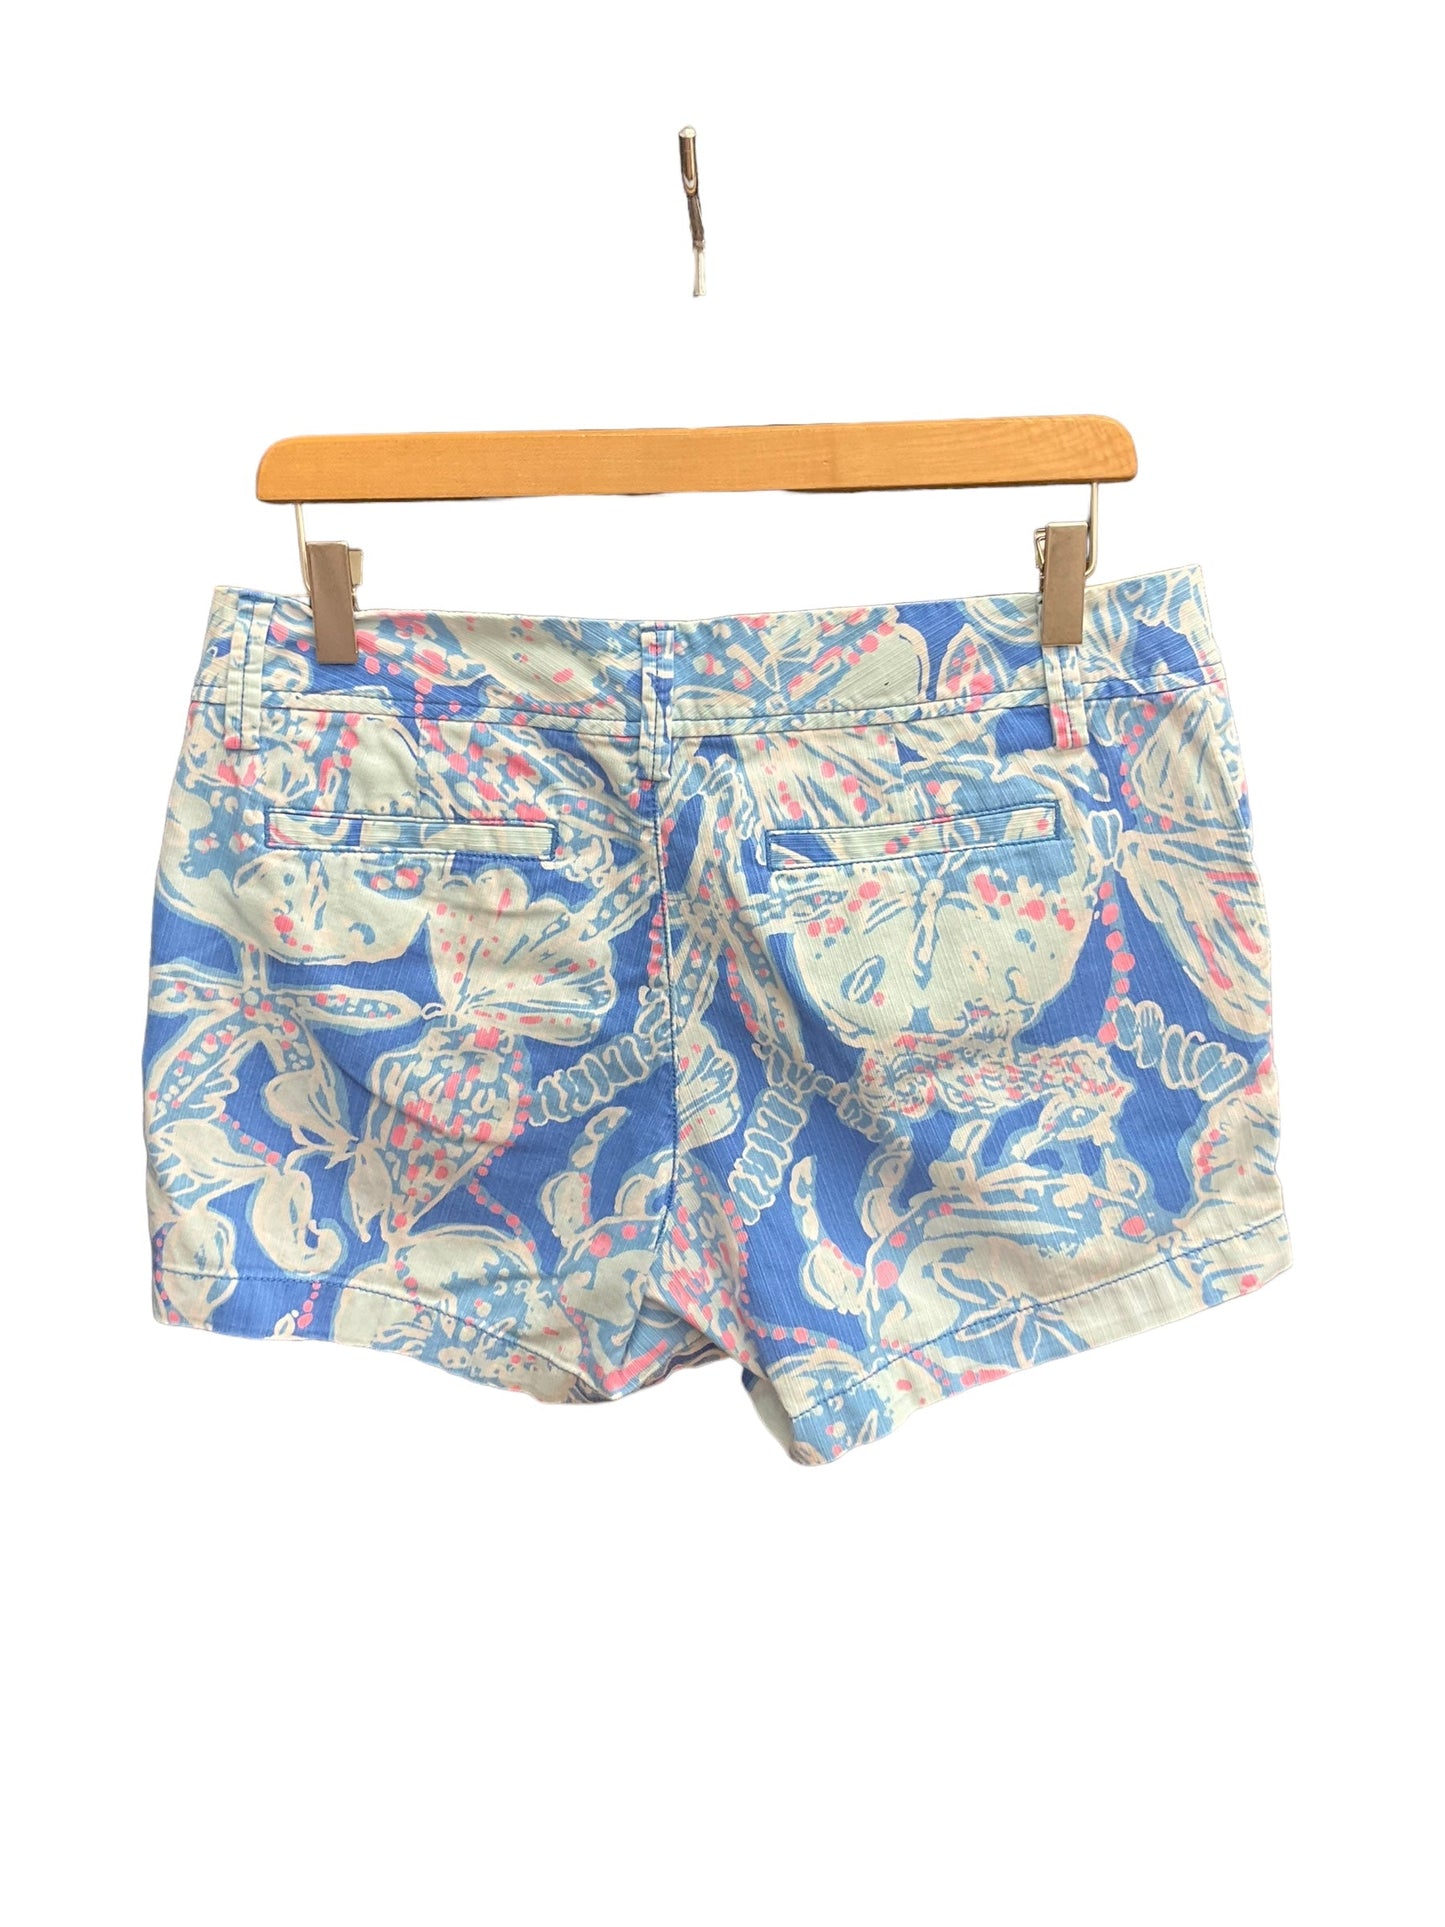 Blue & Pink Shorts Lilly Pulitzer, Size 8